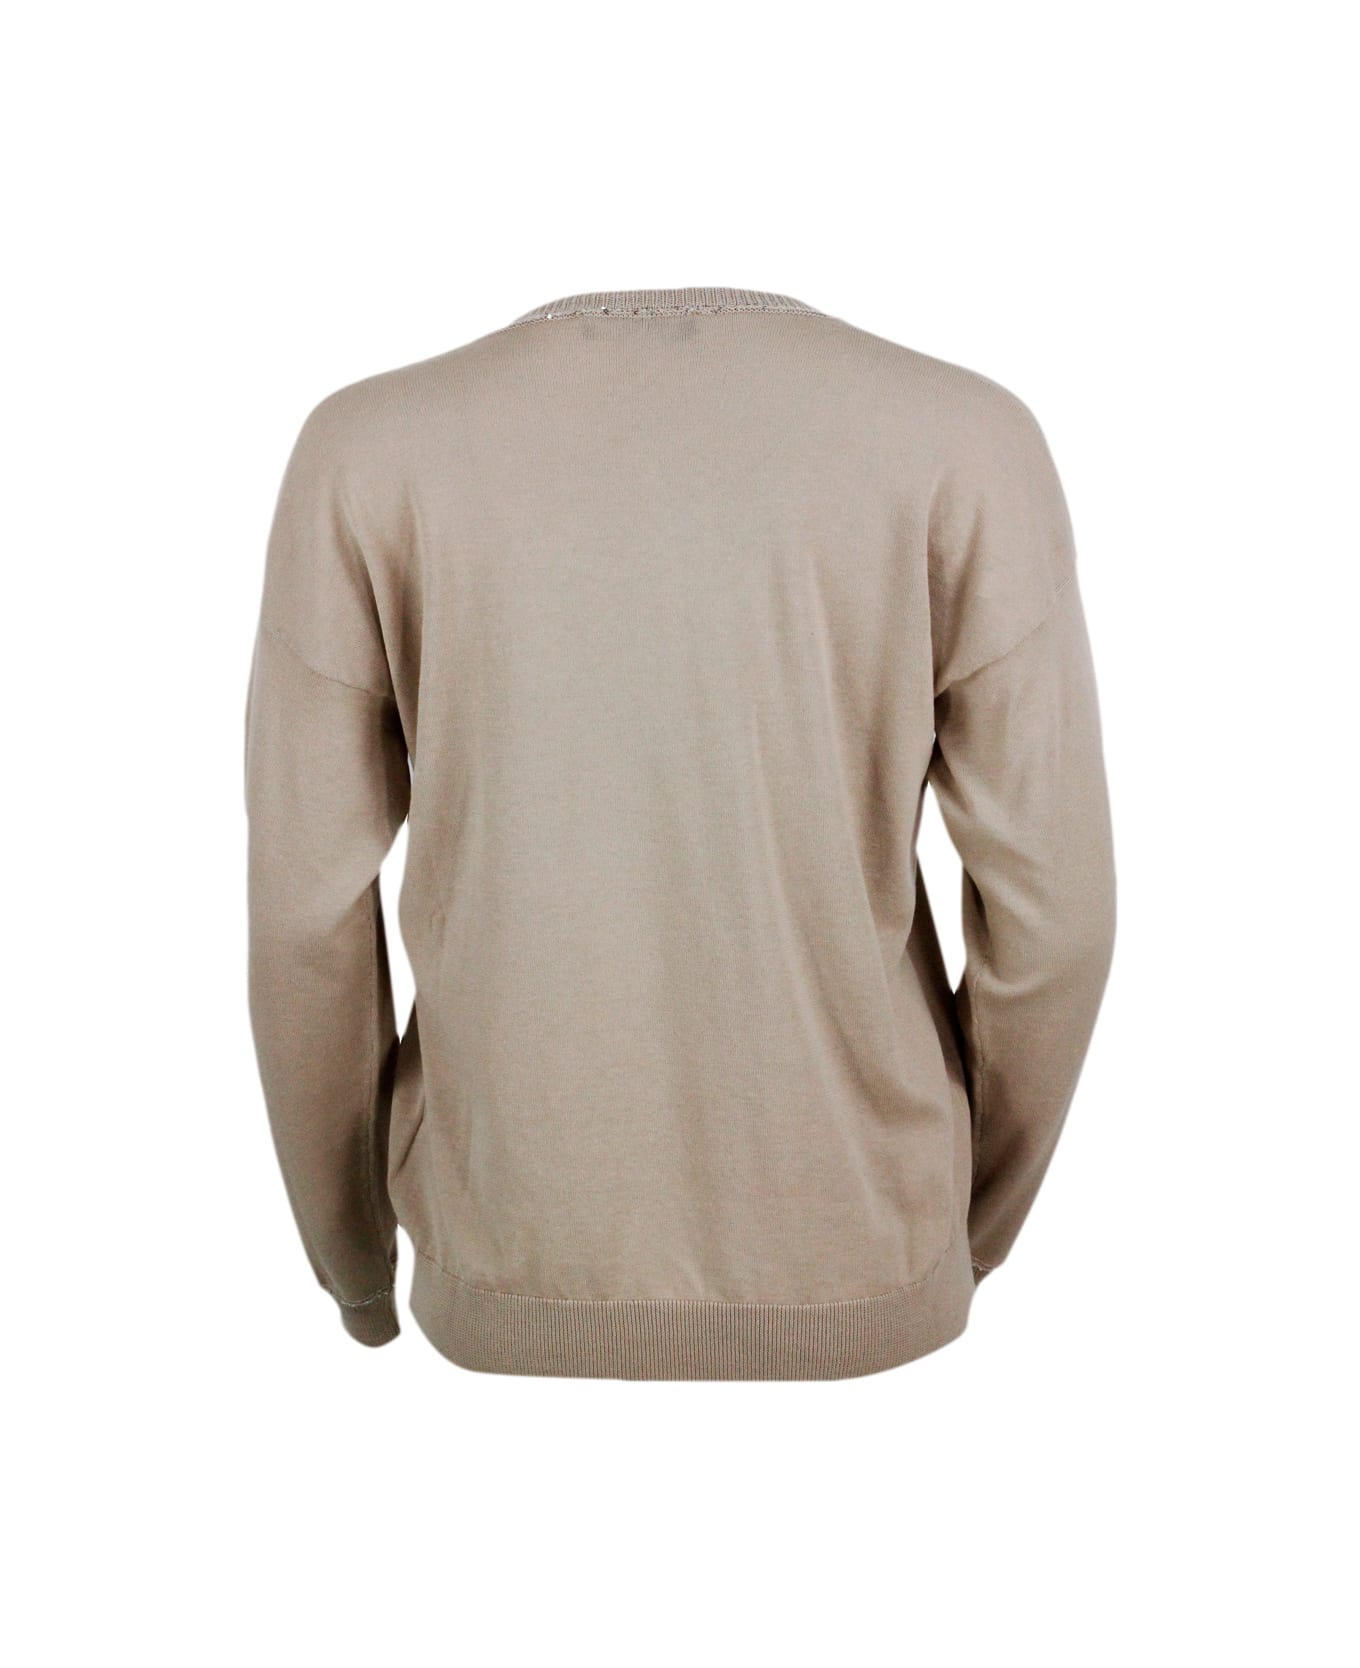 Fabiana Filippi Long-sleeved V-neck Sweater In Fine Cotton Embellished With Brilliant Applied Microsequins - Camel